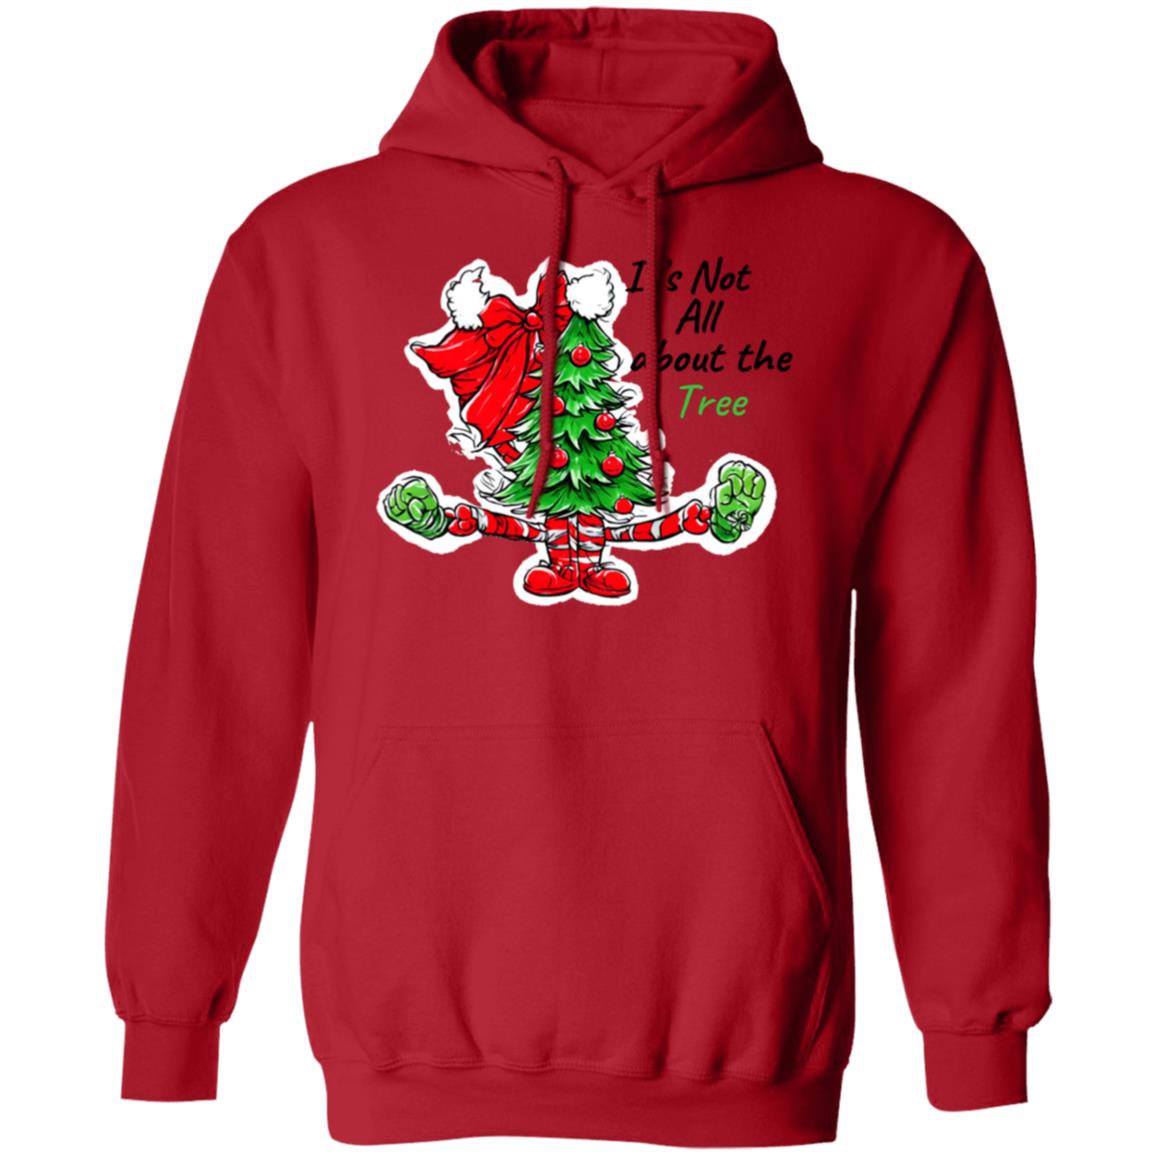 Not all about the tree It's not All About the Tree : Pullover Hoodie